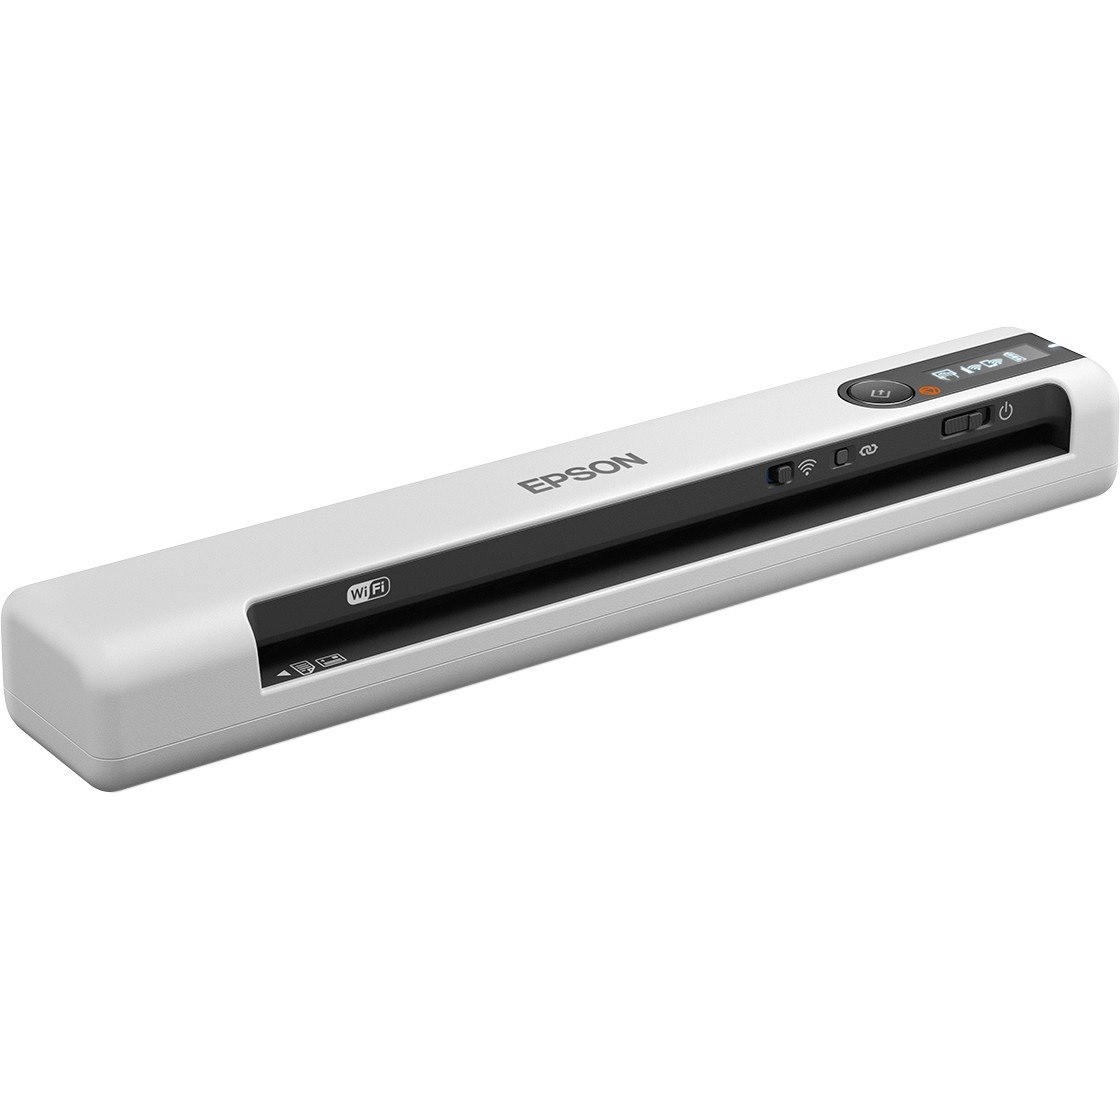 Epson DS-80W Sheetfed Scanner - 600 dpi Optical